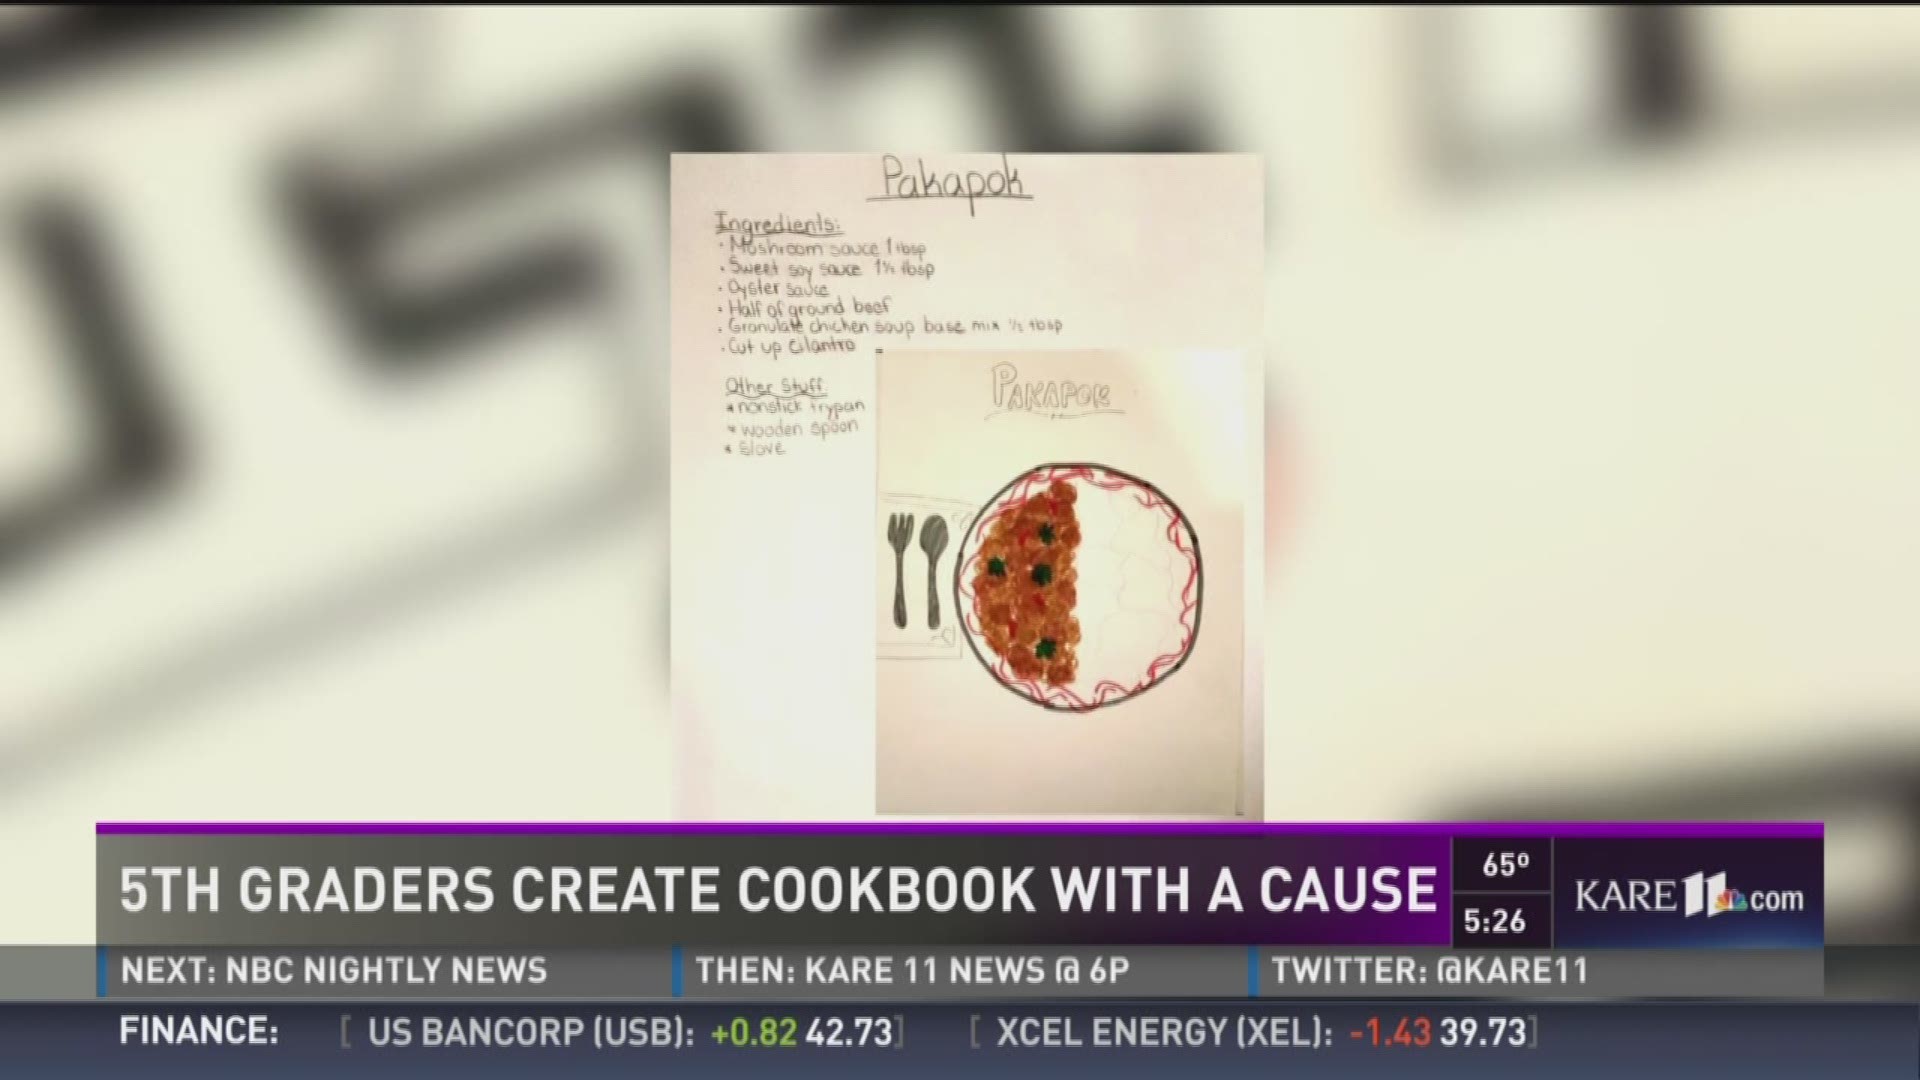 5th graders create cookbook with a cause